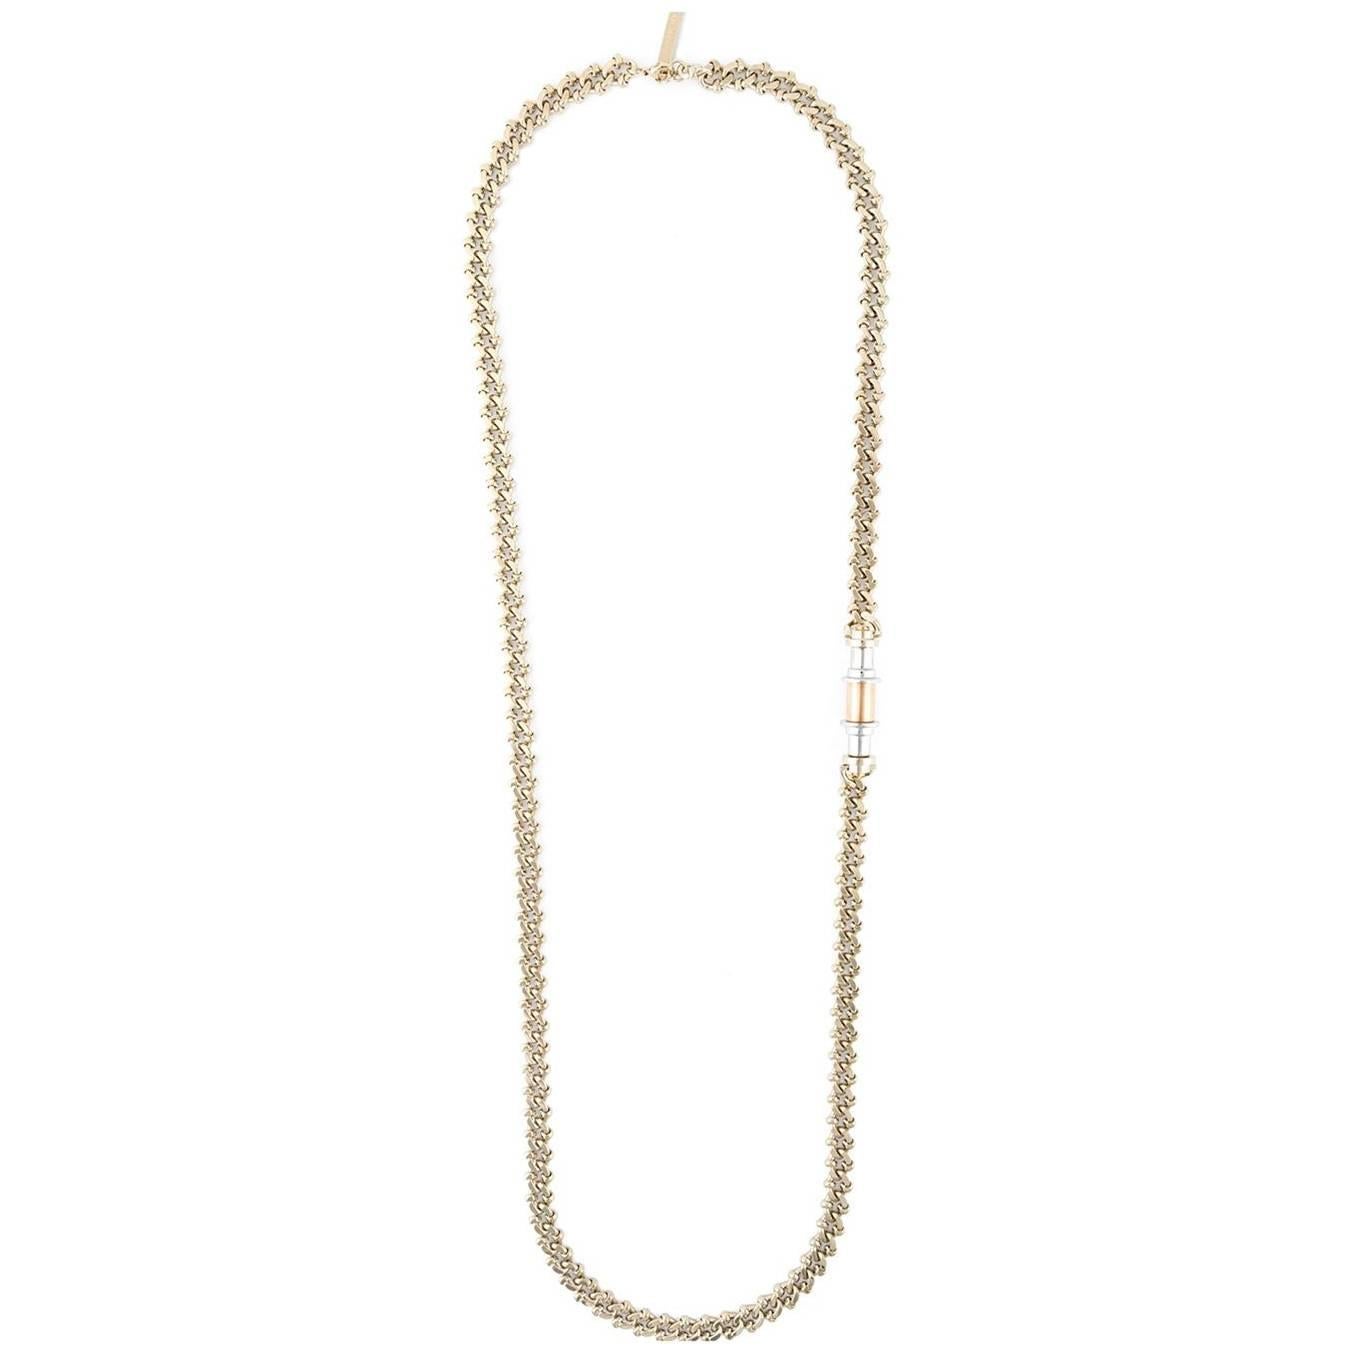 Givenchy NEW & SOLD OUT Gold Chain Link Long Drape Necklace in Box